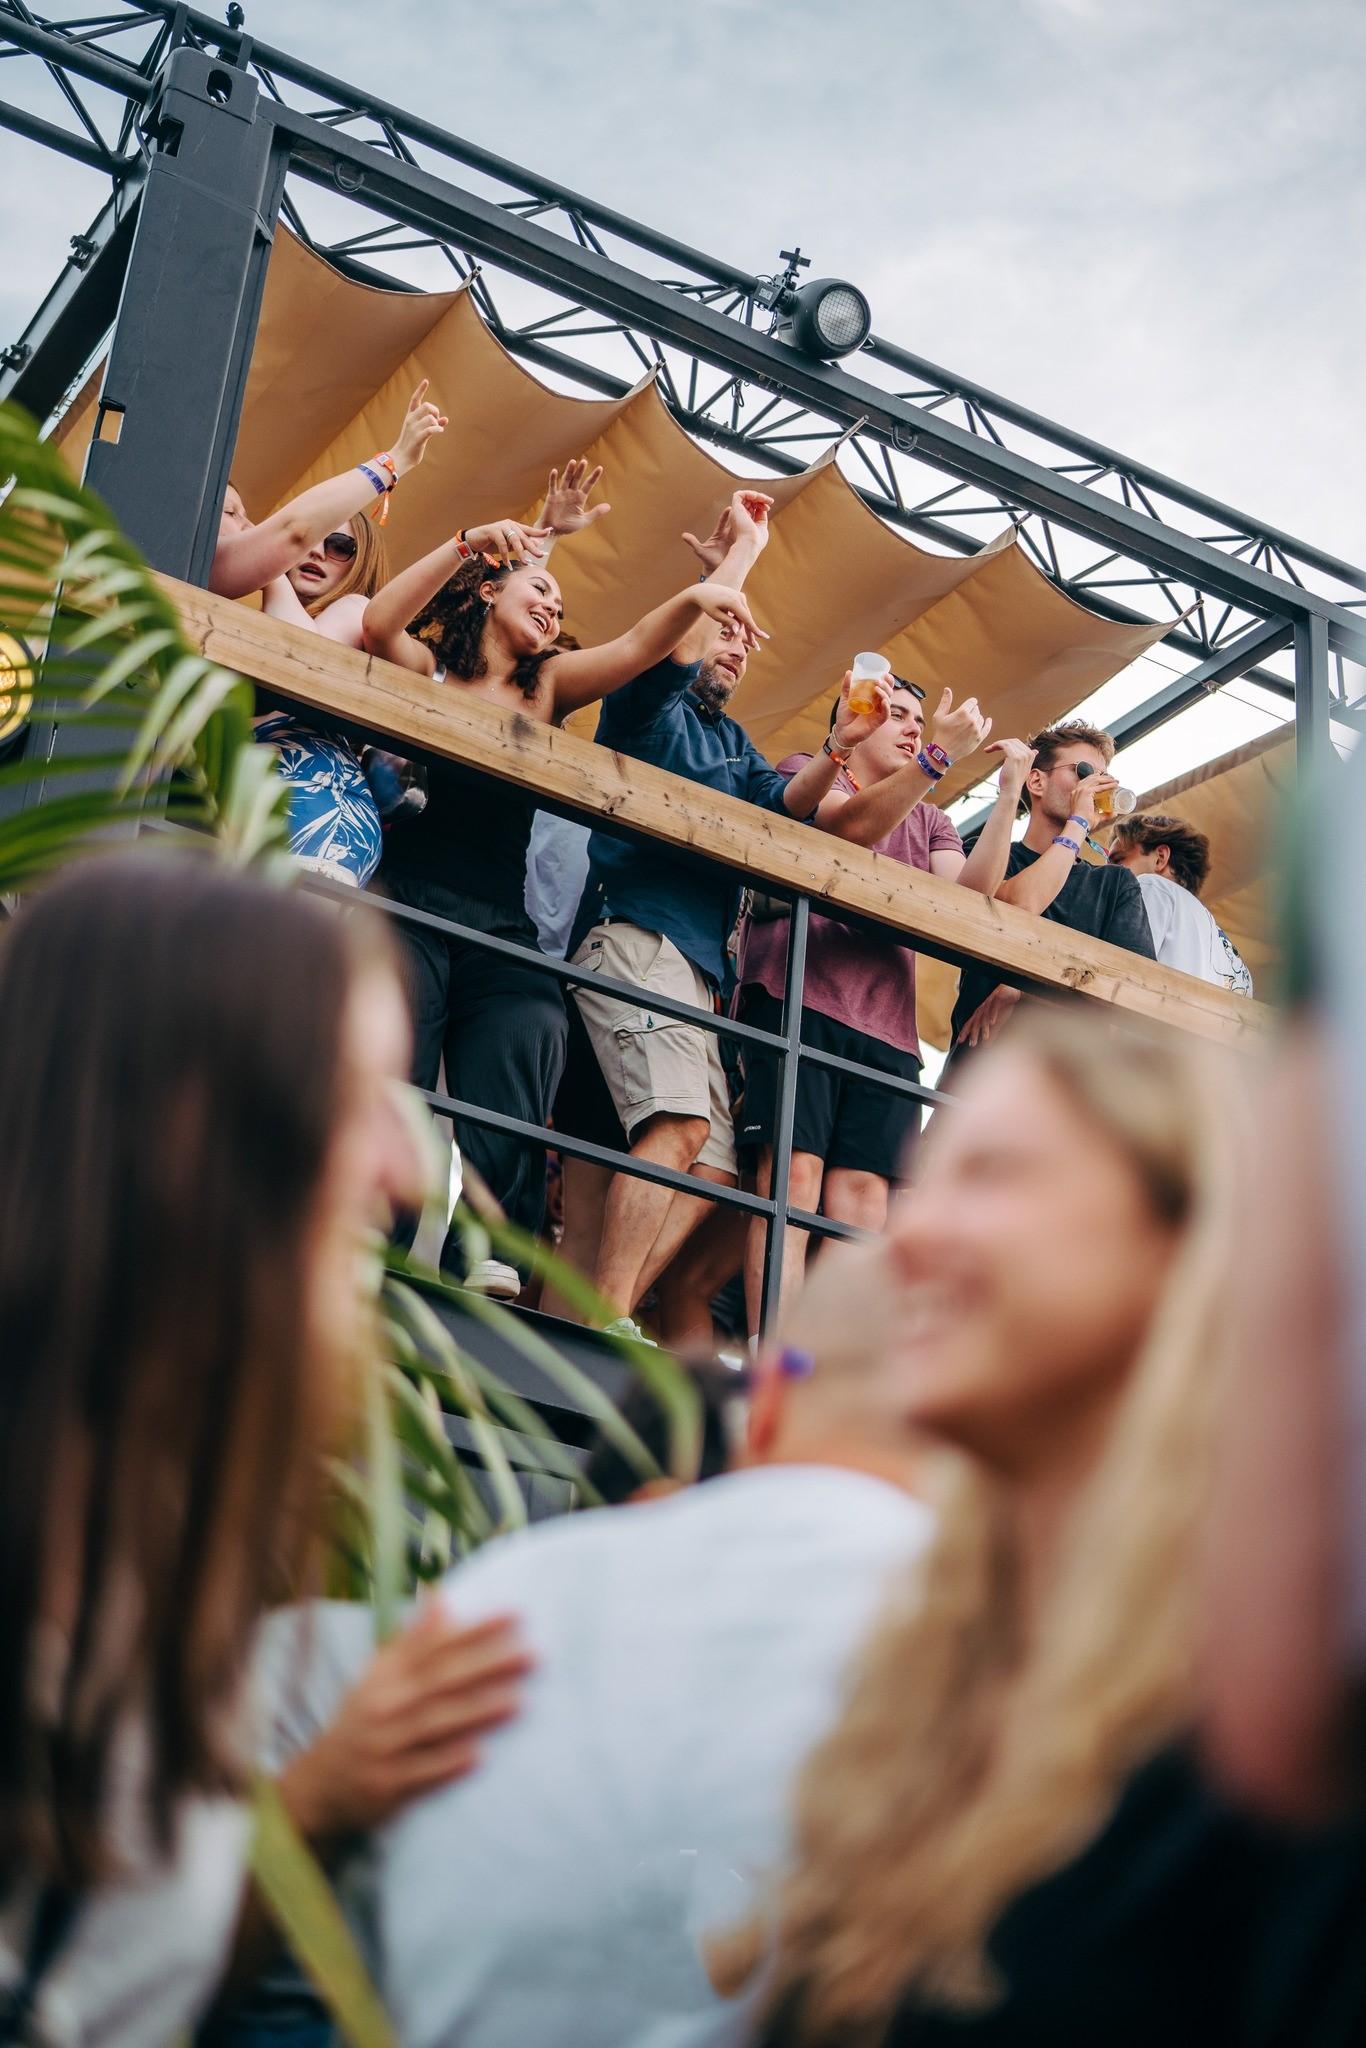 Mobile rooftop bar for events, festivals, corporate functions and dance parties Available for hire or sale at ContainerID